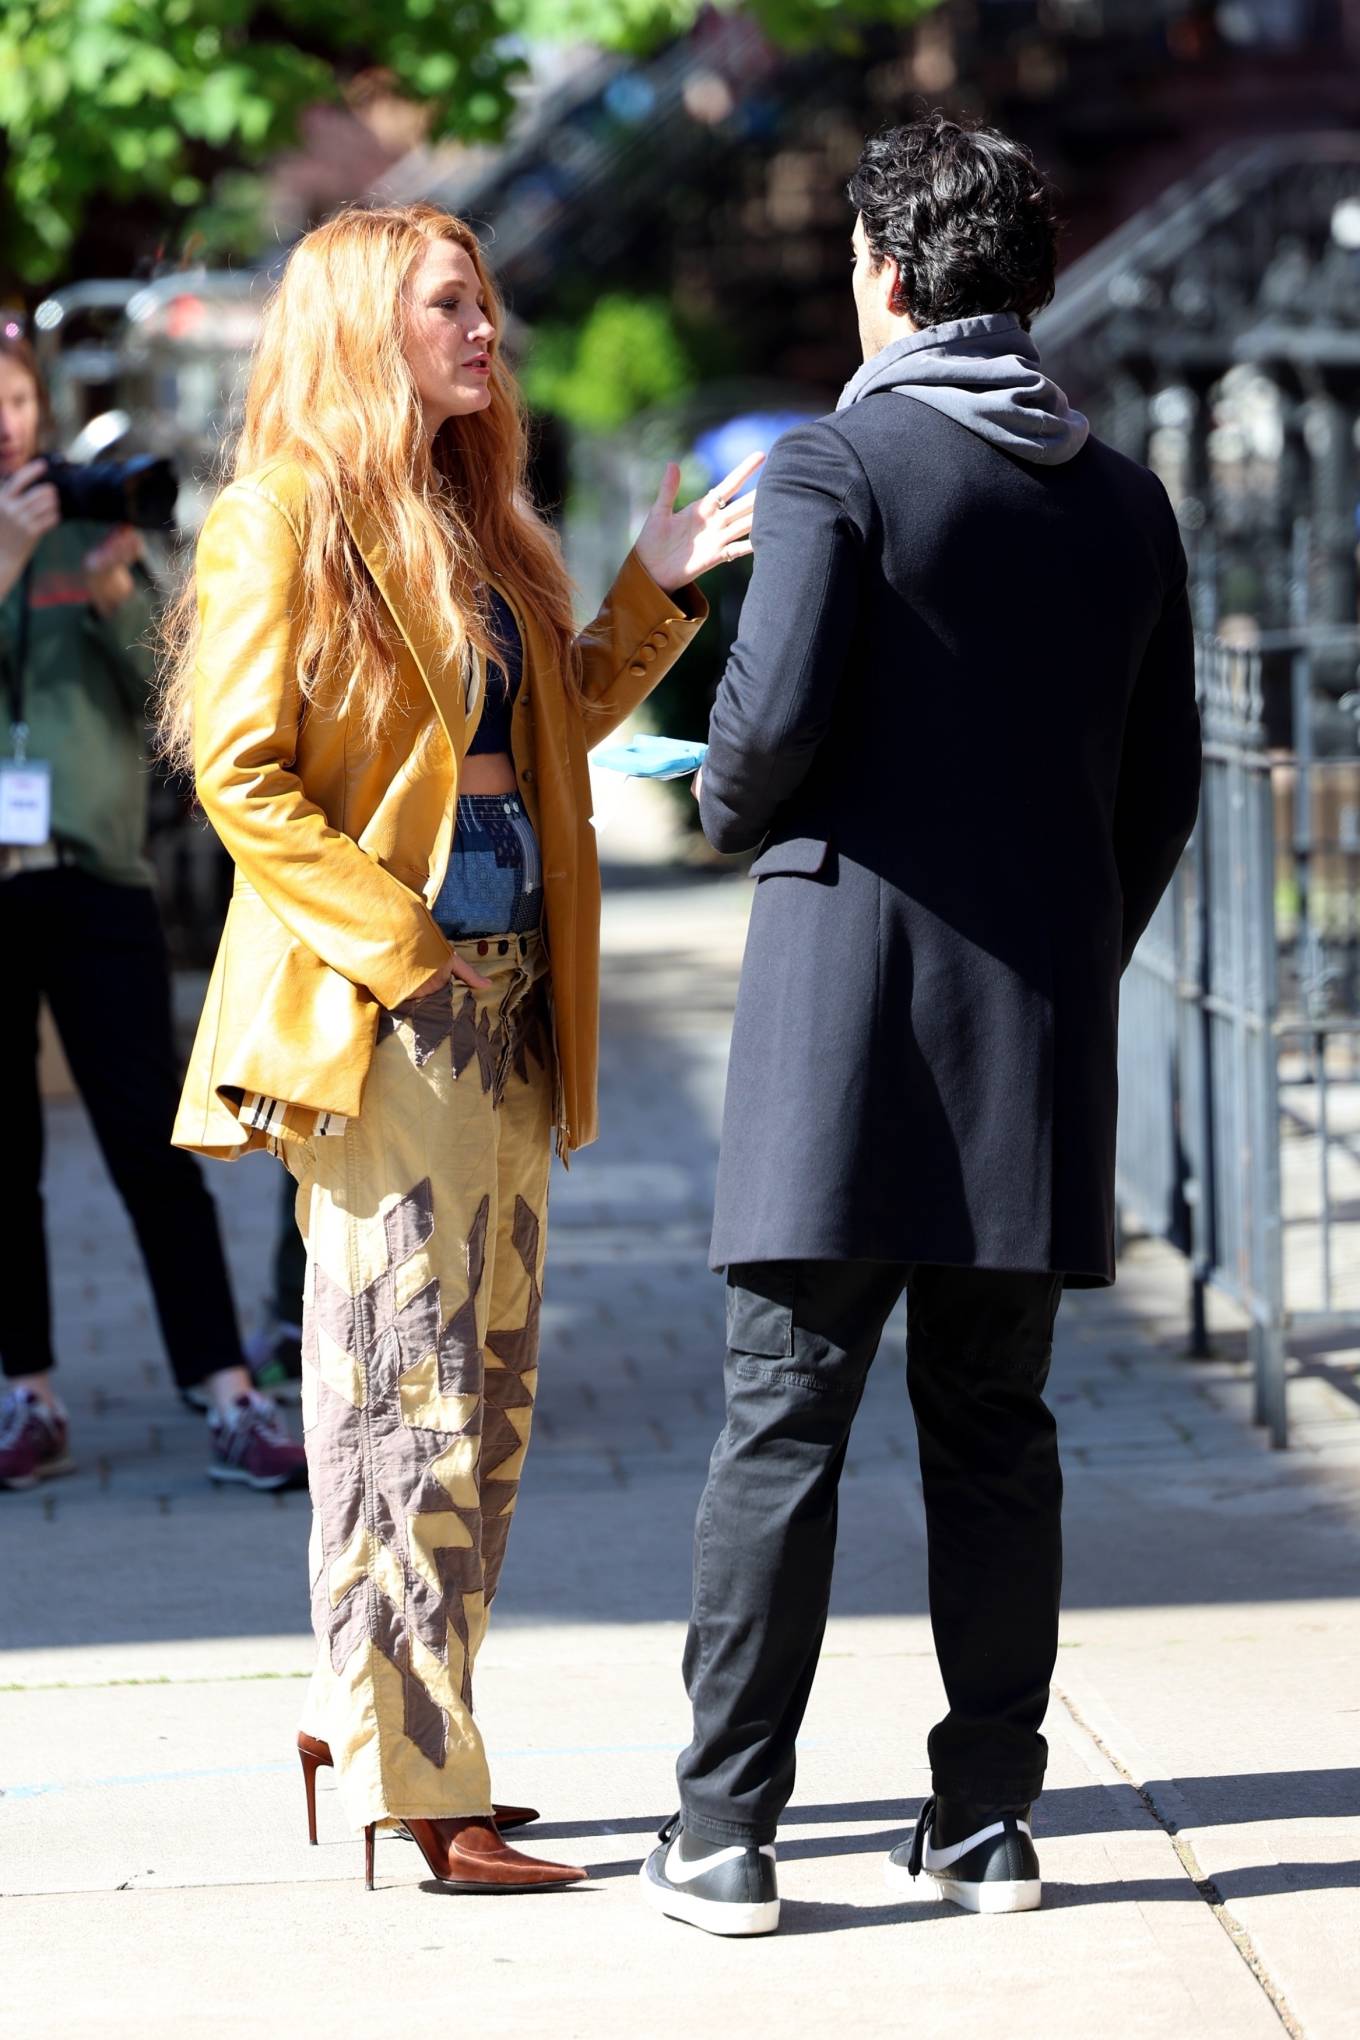 Blake Lively - With Justin Baldoni On set for 'It Ends With Us' in Hoboken - New Jersey